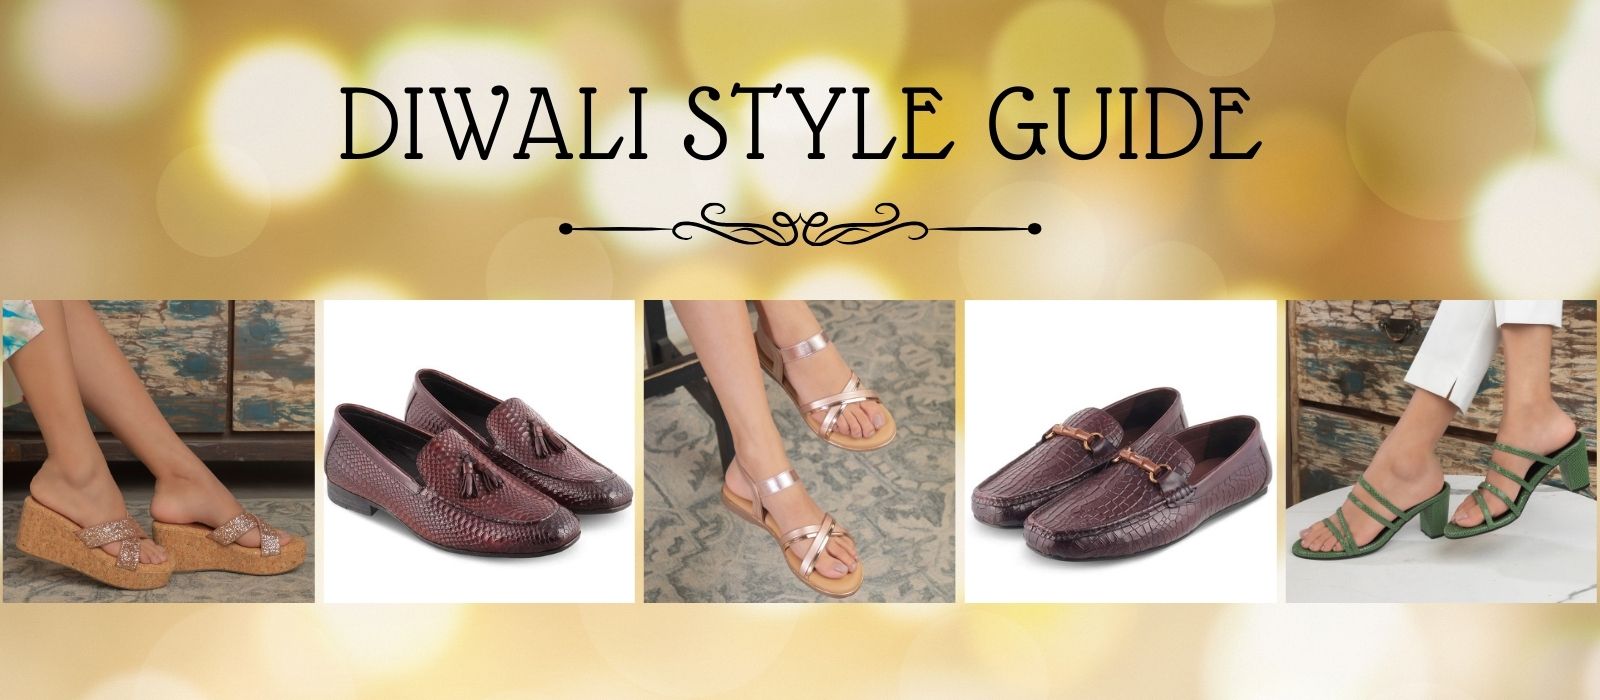 Diwali Style Guide: Choosing the Perfect Footwear for Men and Women